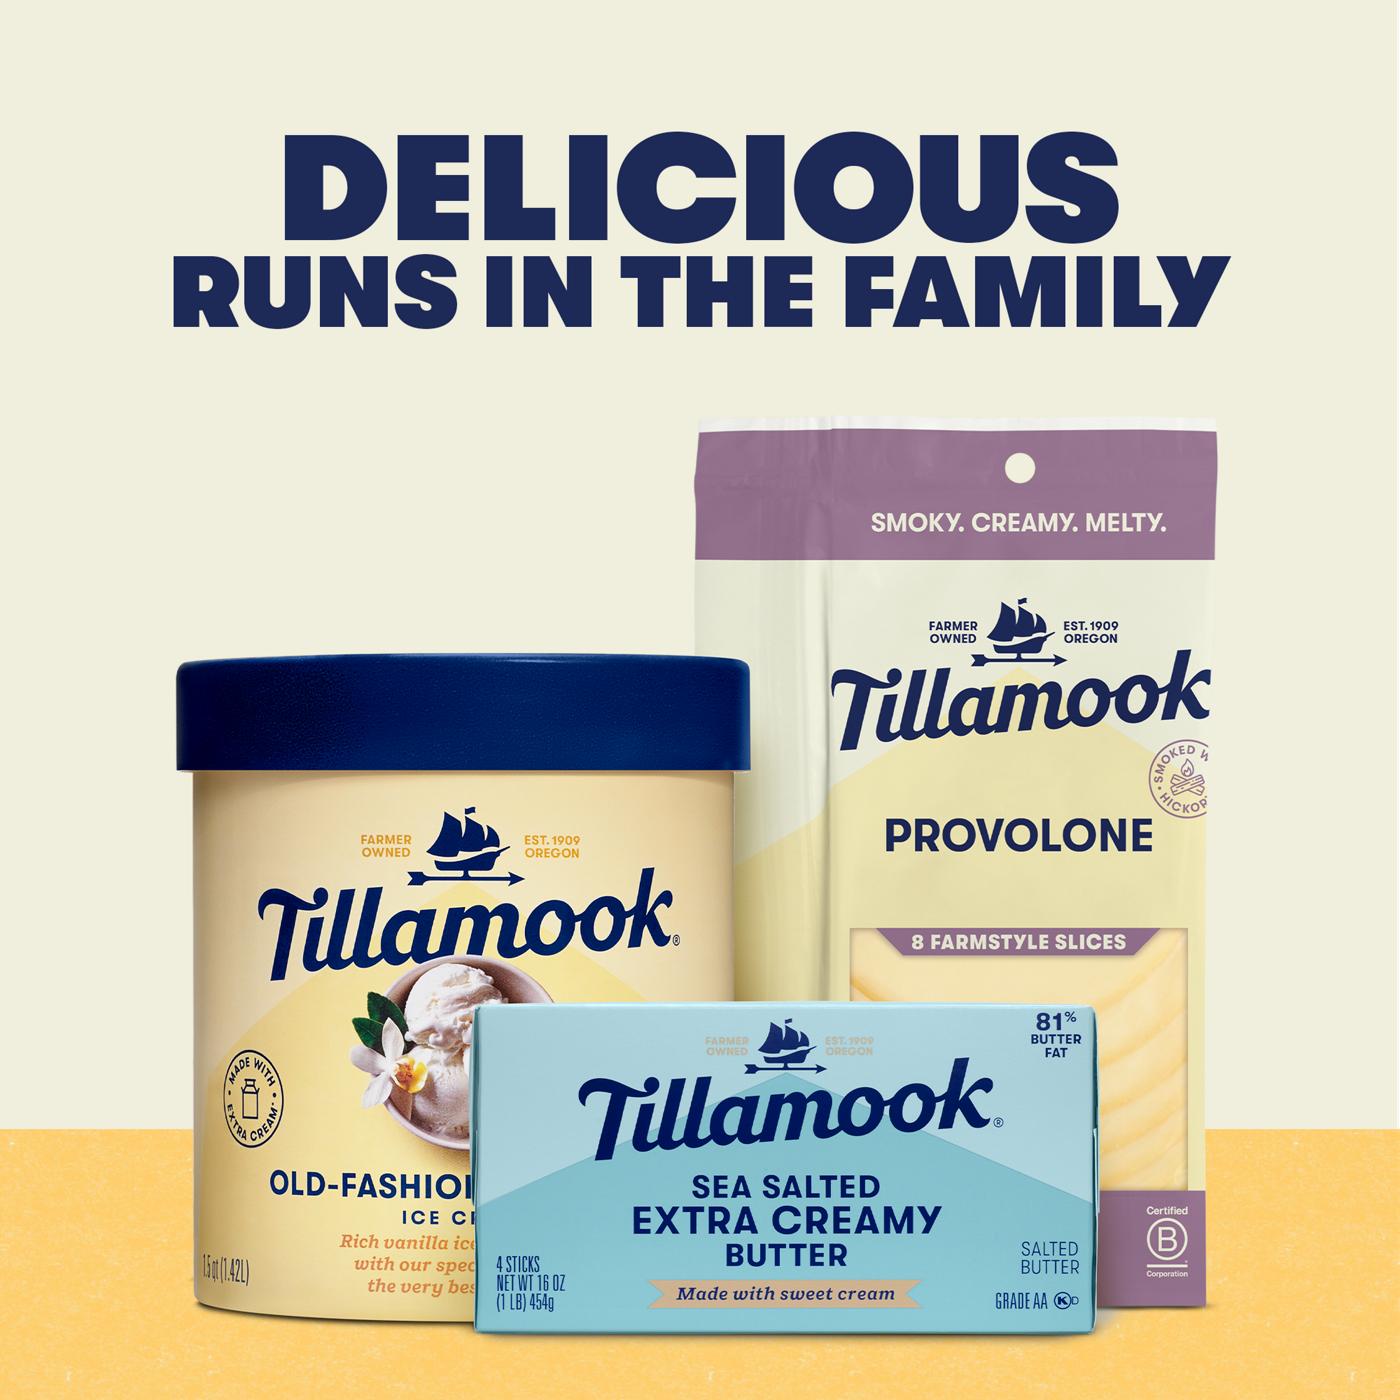 Tillamook Smoked Provolone Sliced Cheese, Thick Cut; image 3 of 5